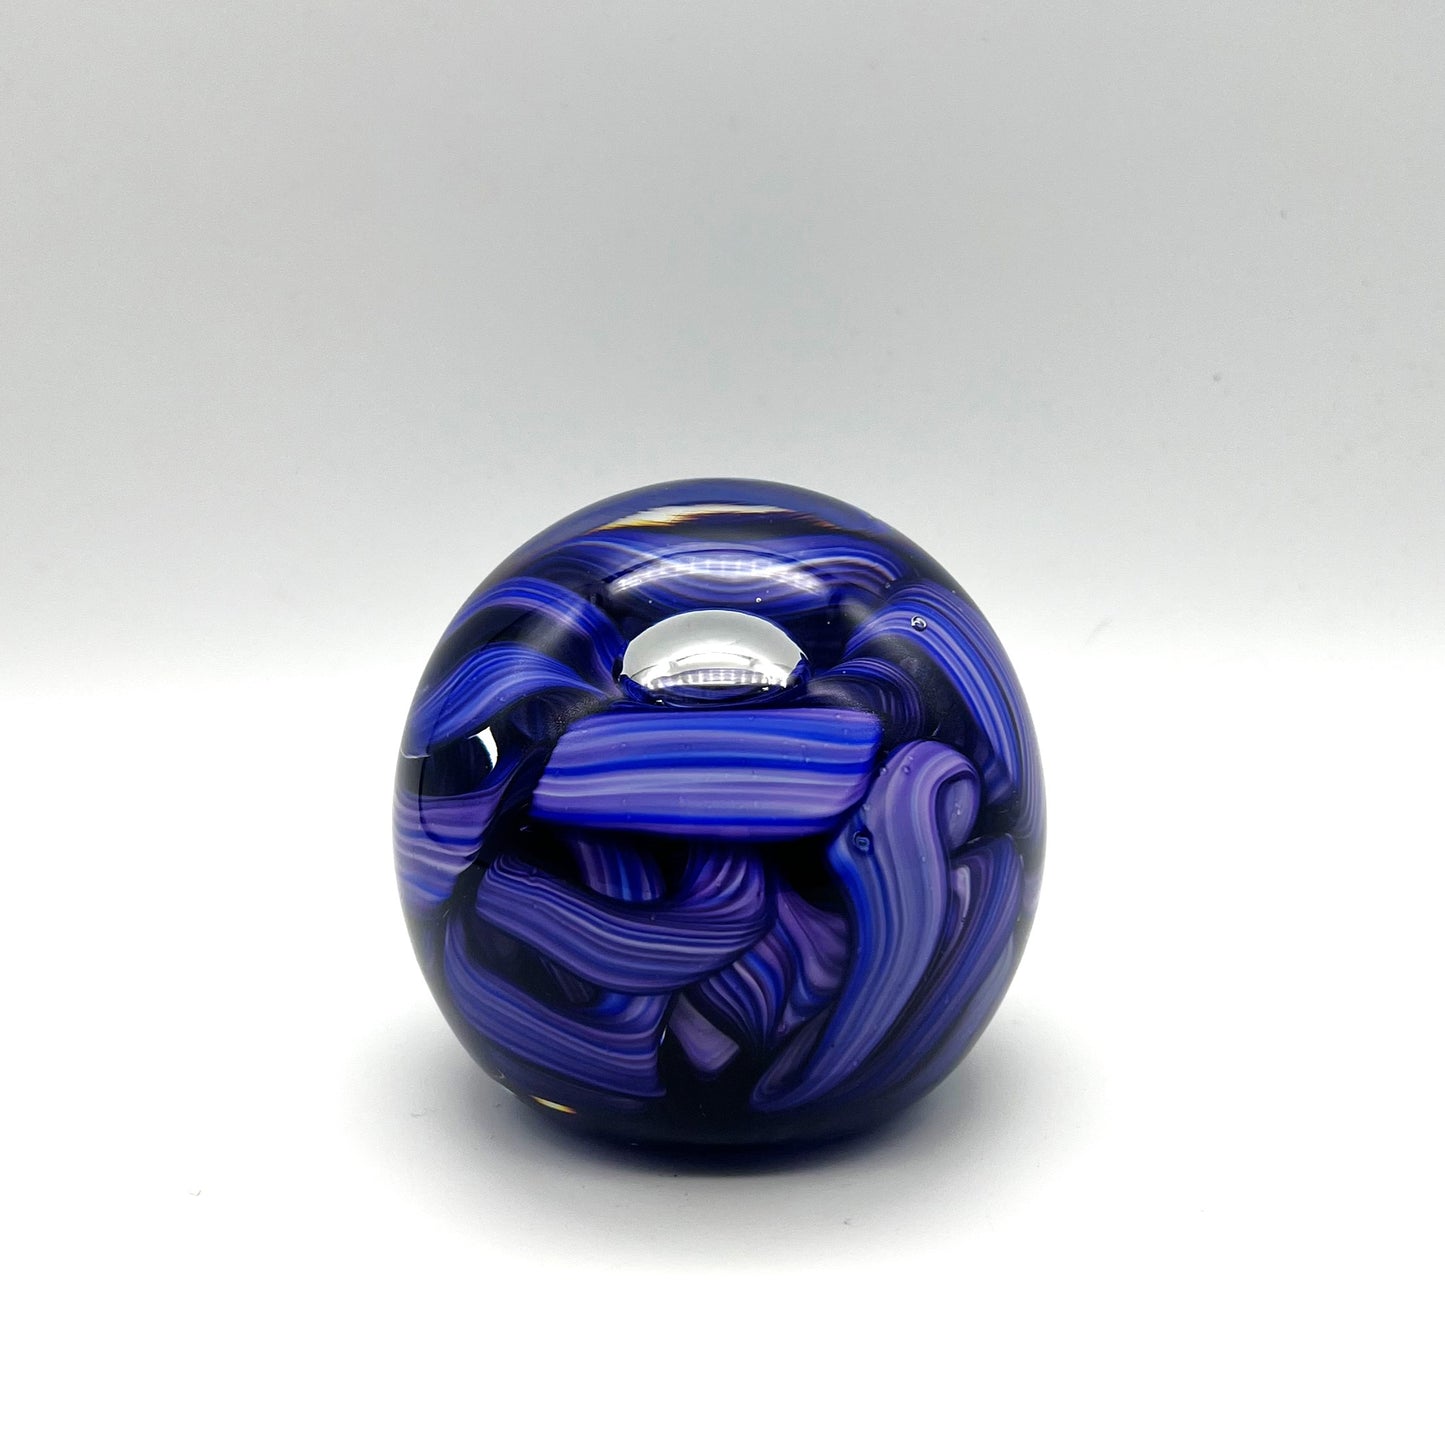 Ribbon Paperweight by Hudson Glass